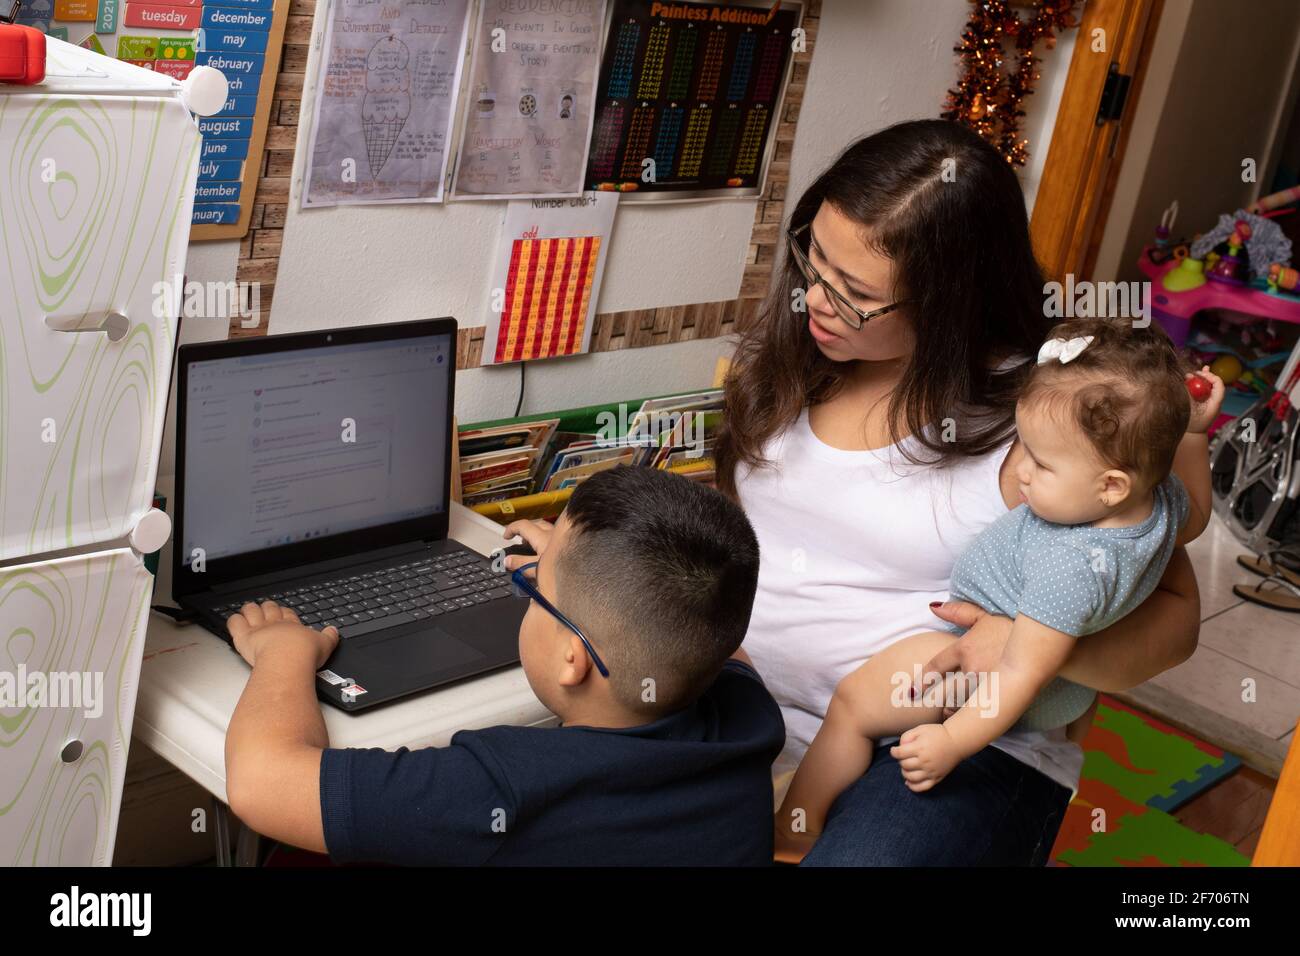 7 year old boy, wearing glasses using laptop computer for school work, mother assisting him holding her 7 month old sister, learning  at home Stock Photo